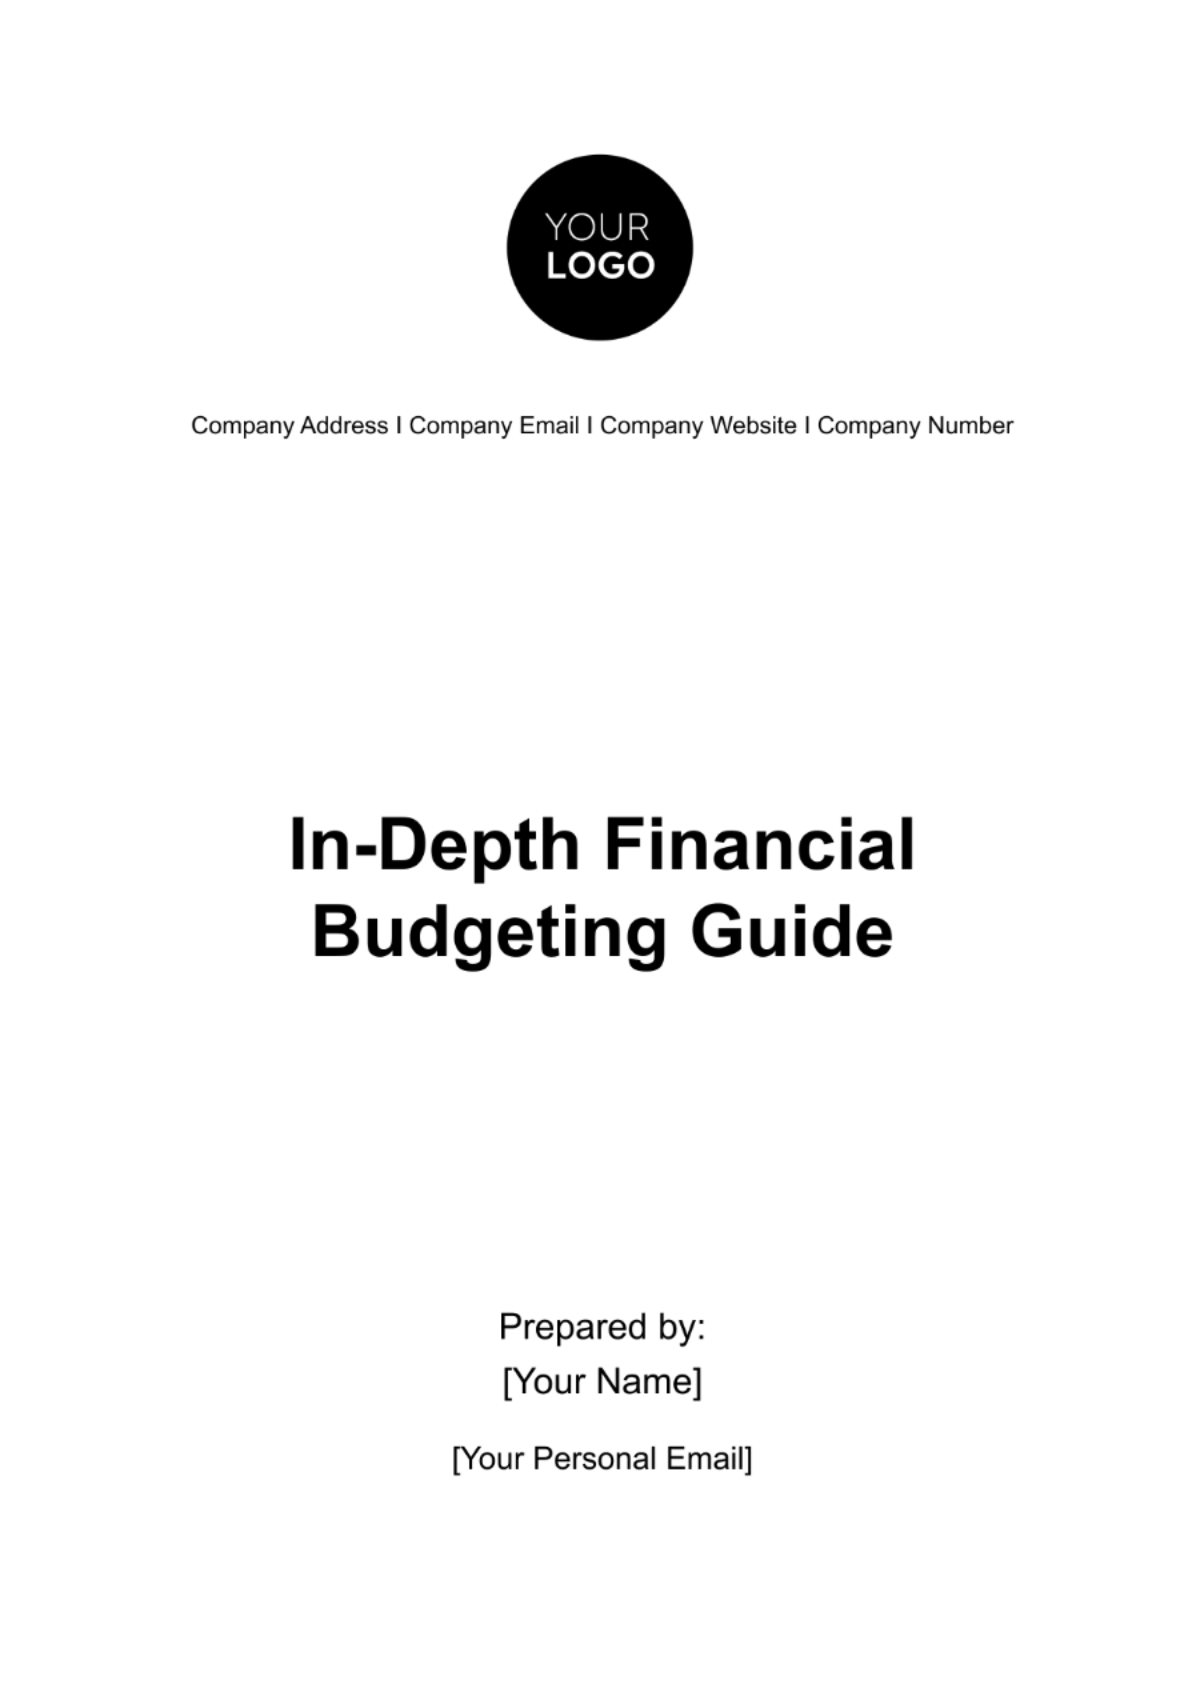 In-Depth Financial Budgeting Guide Template